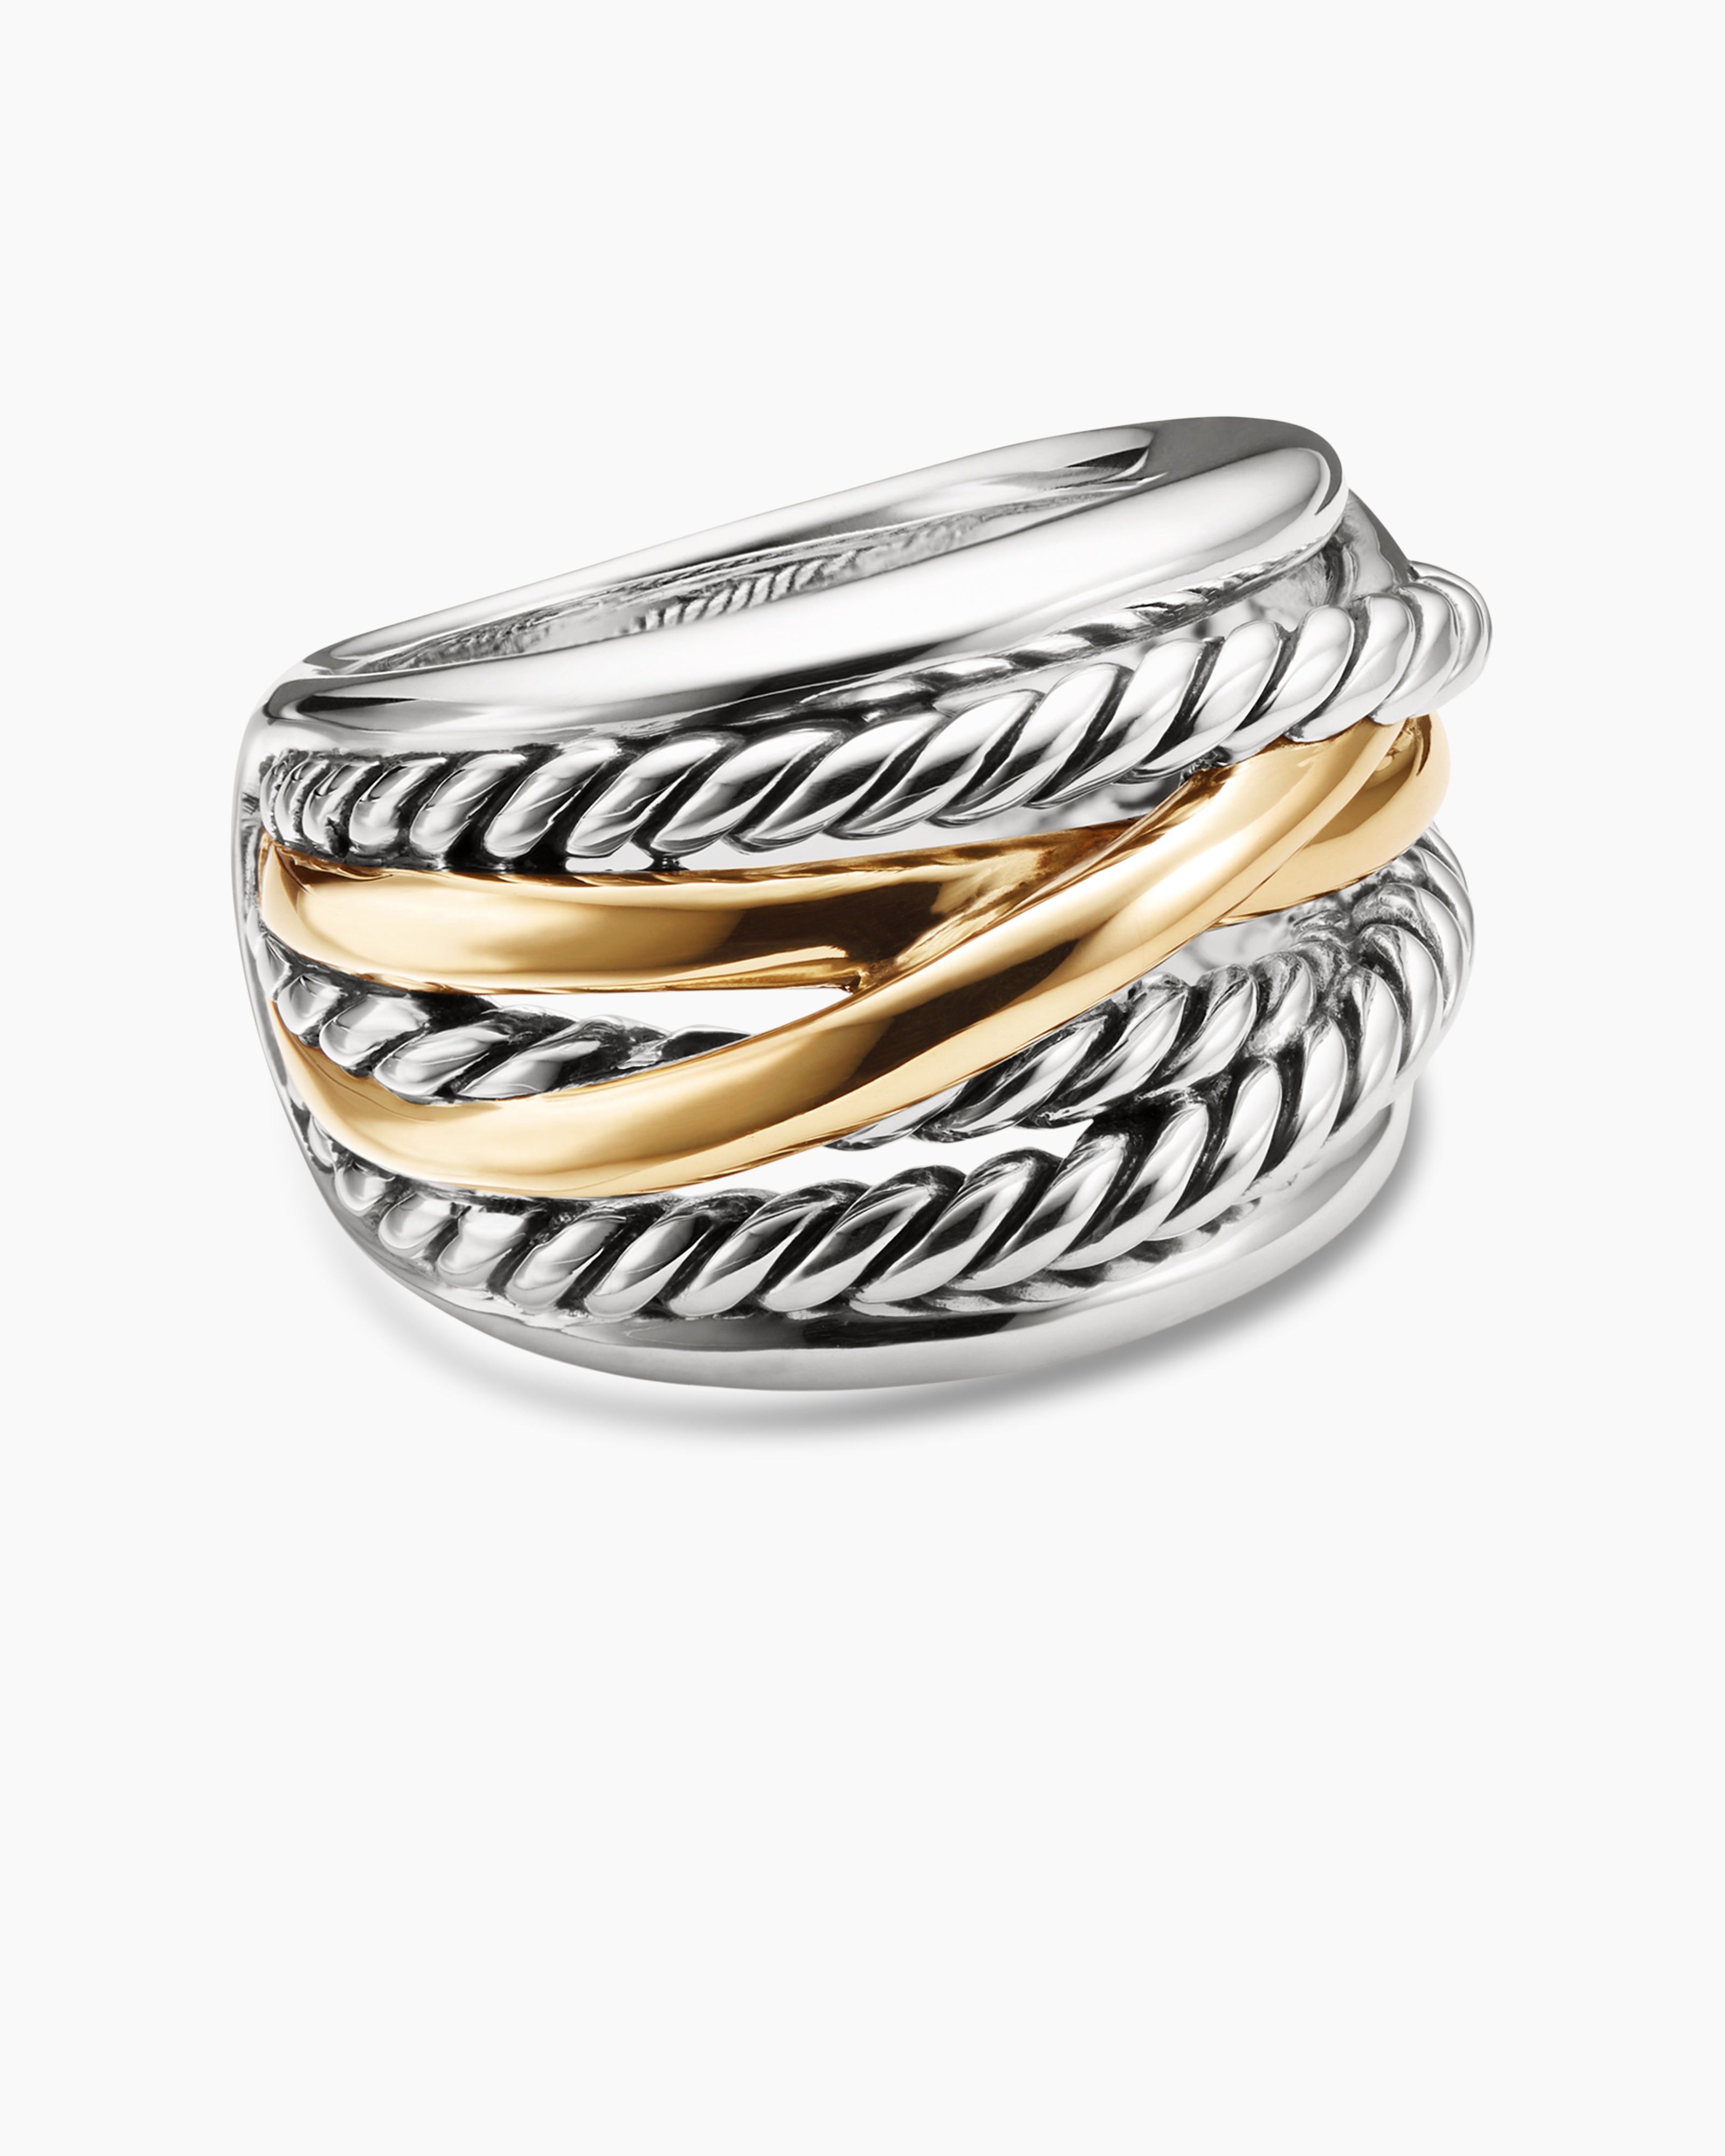 White Gold Jewelry - Read this BEFORE you buy!